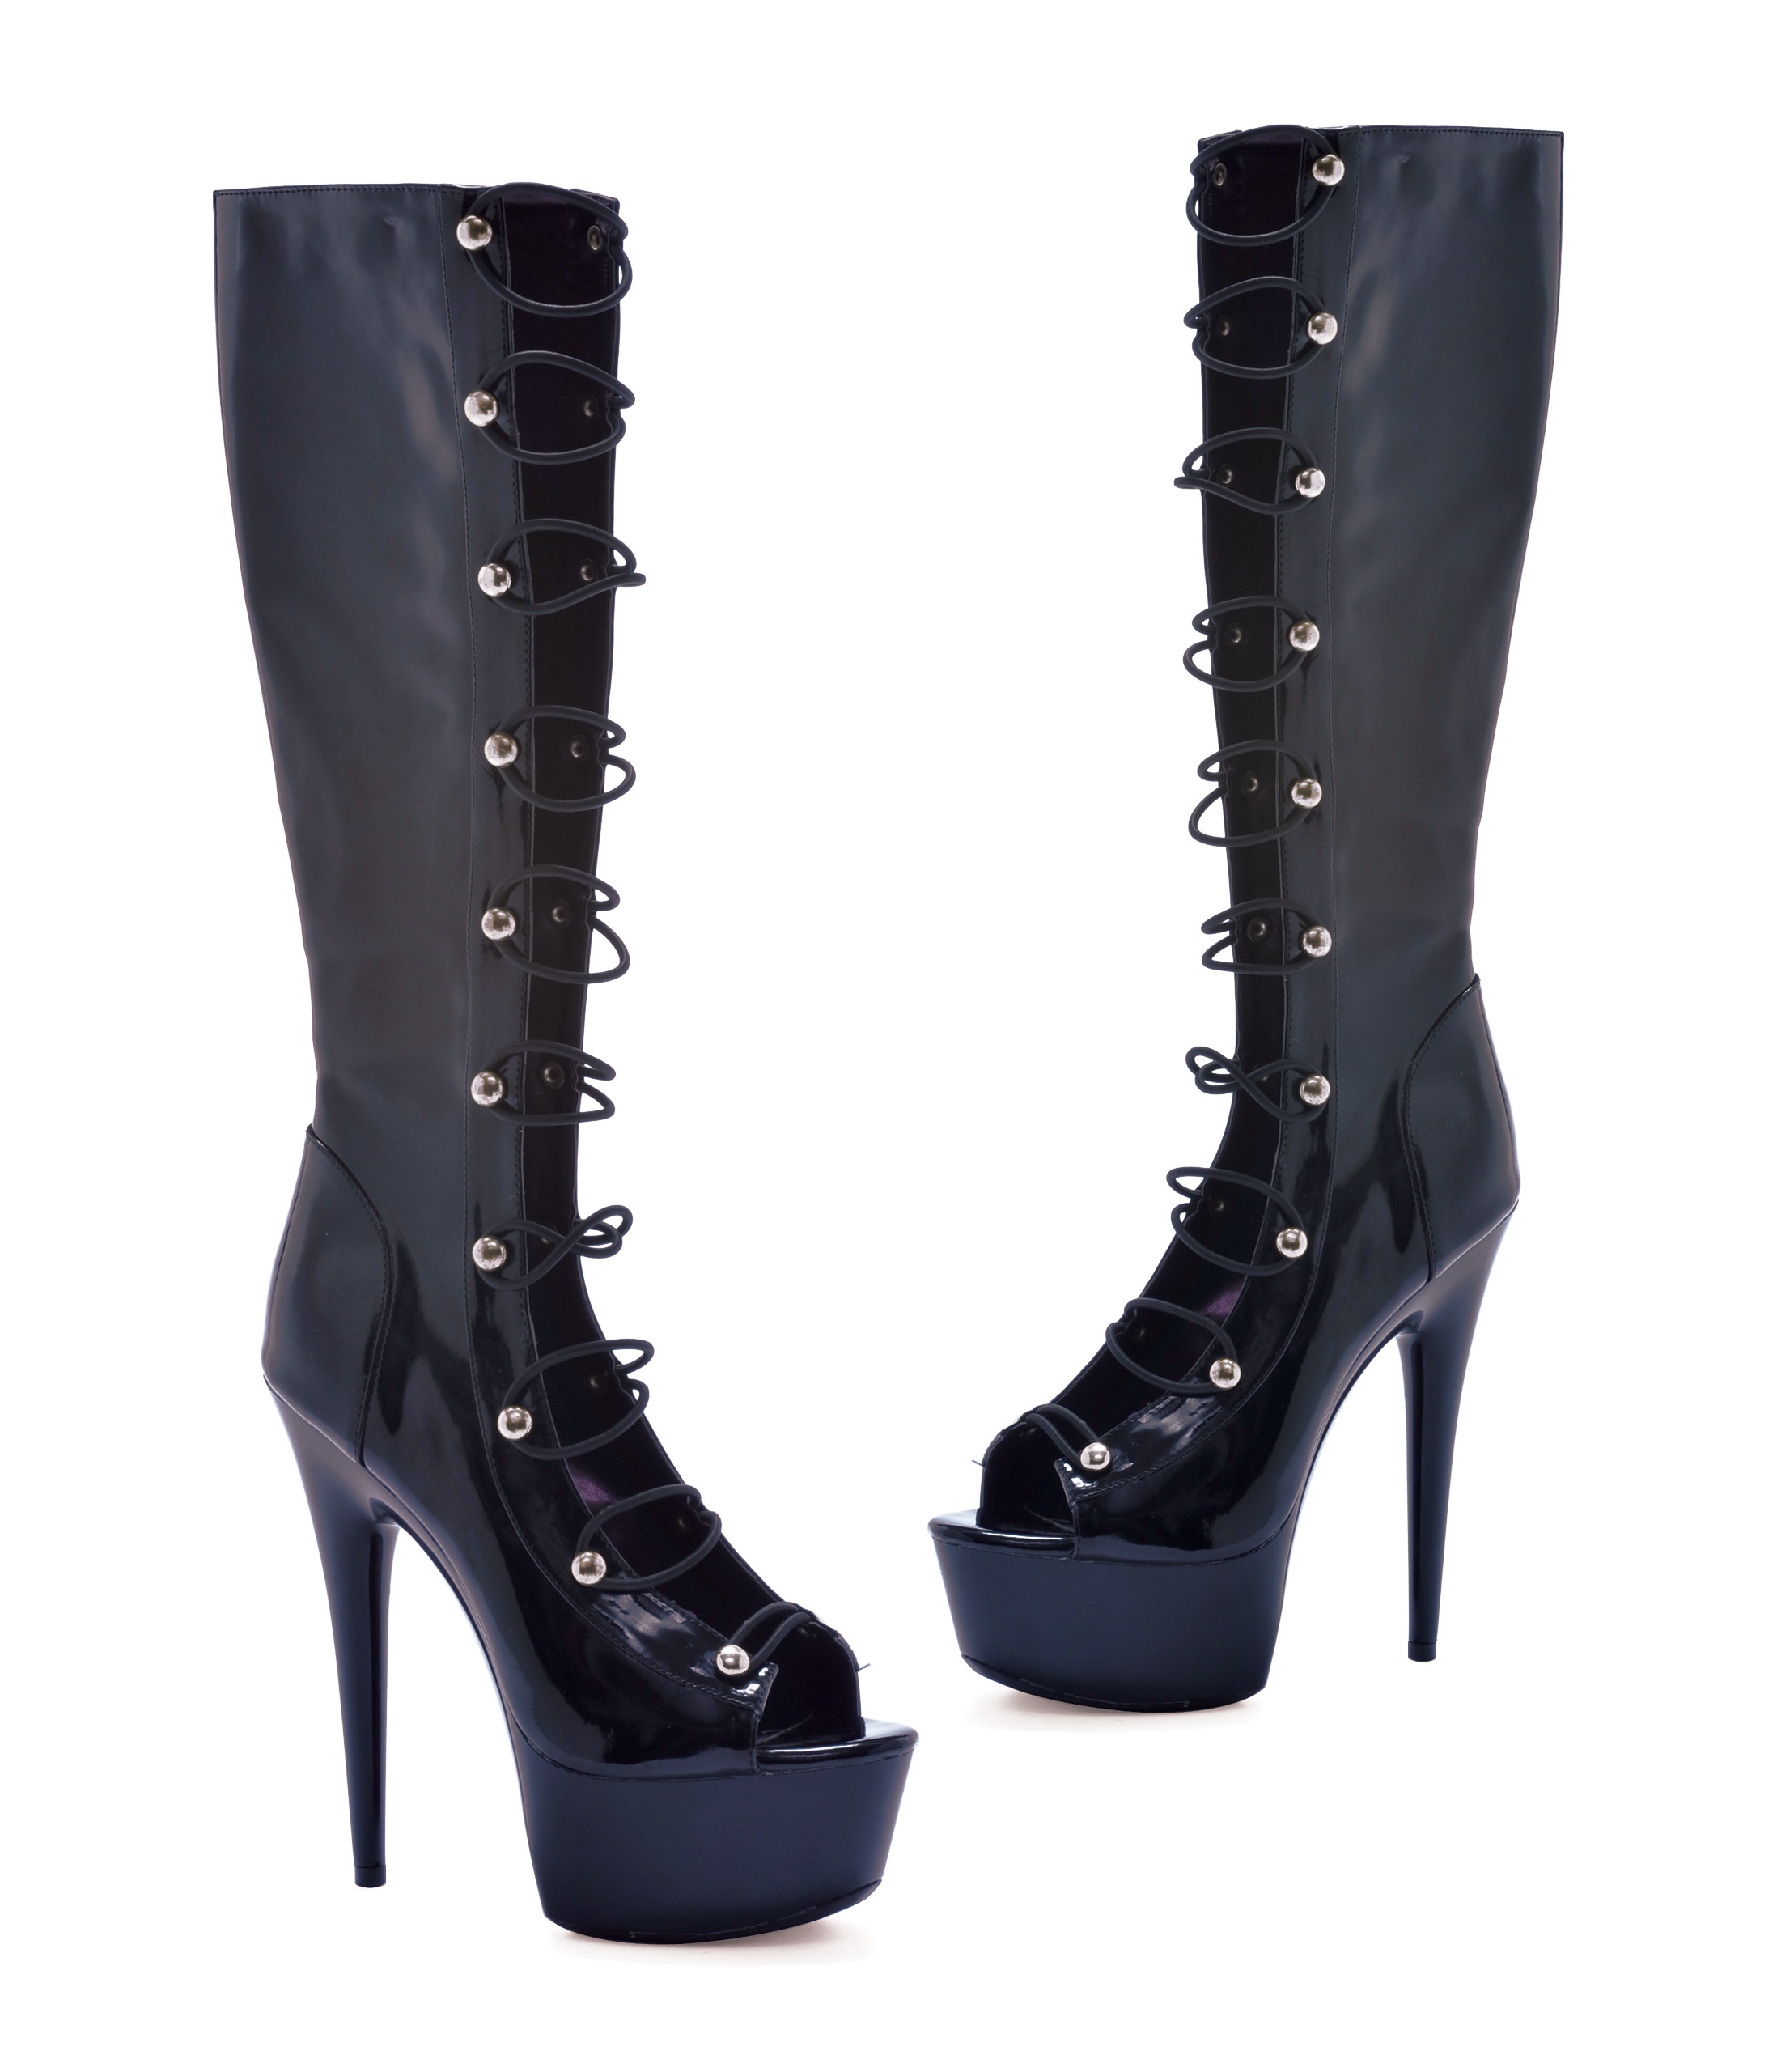 Tyra - 6 Inch Black Platform Boots with Strappy Front